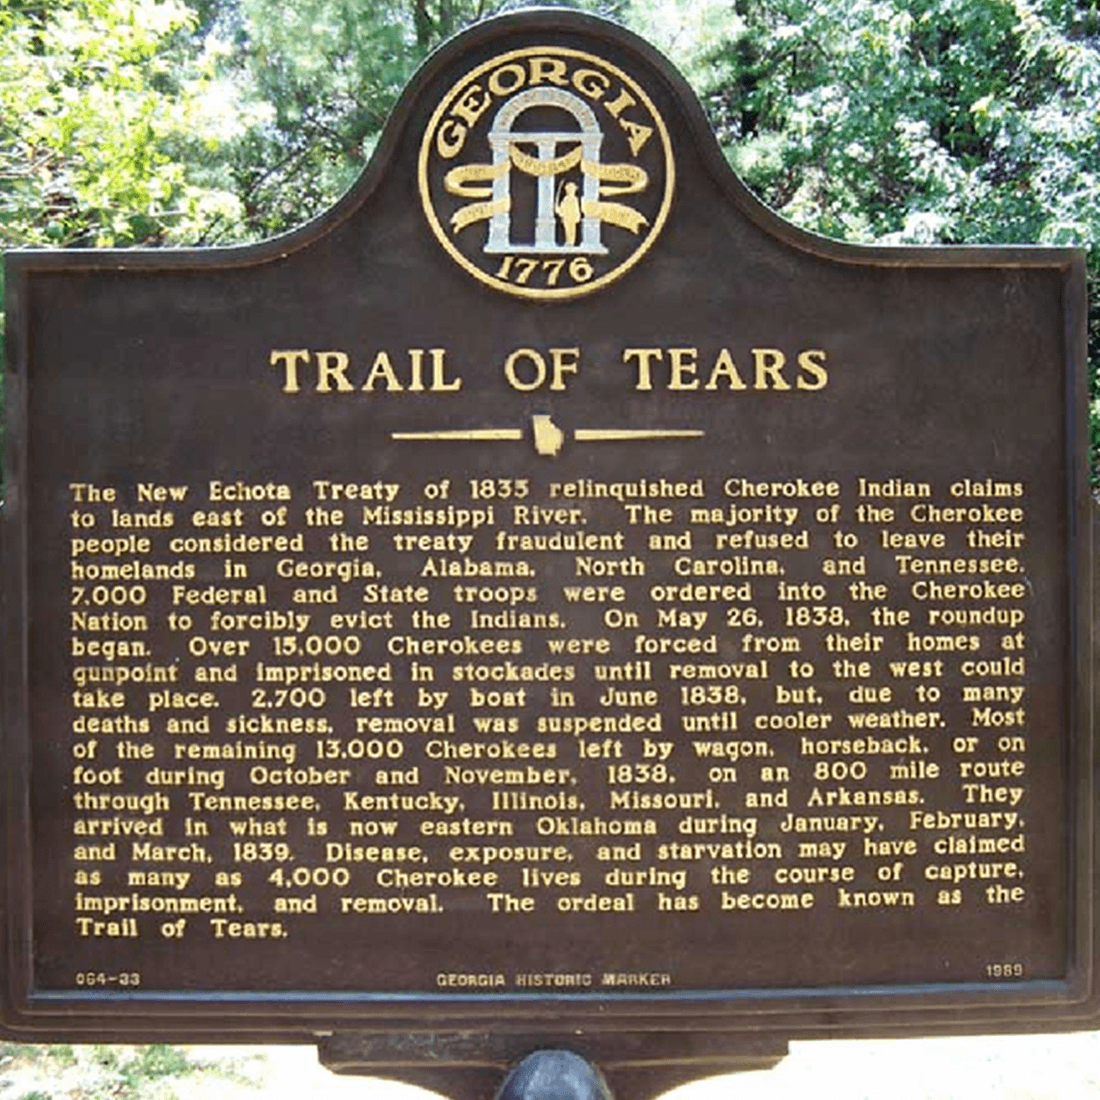 Trail of Tears Sign (Source: Channelview Independent School District)